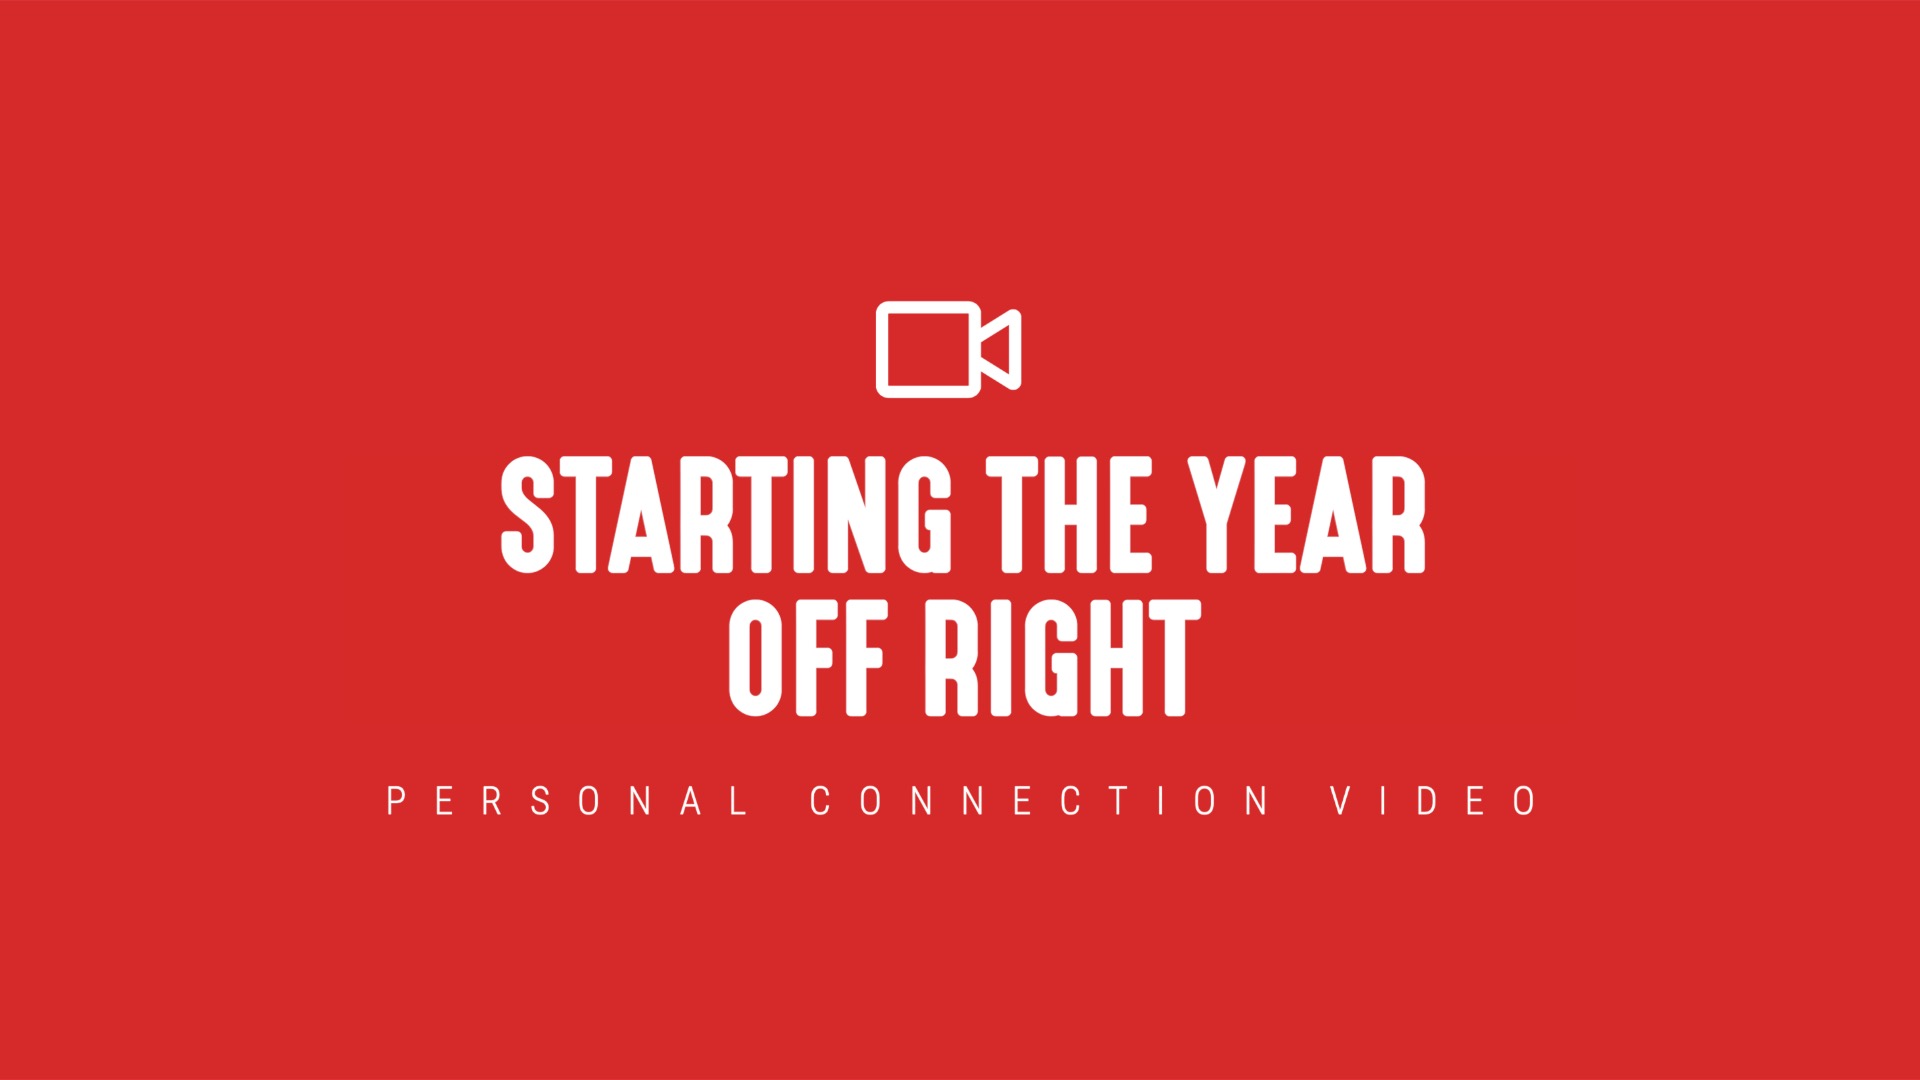 [NEW] Personal Connection Video | Starting the Year Off Right